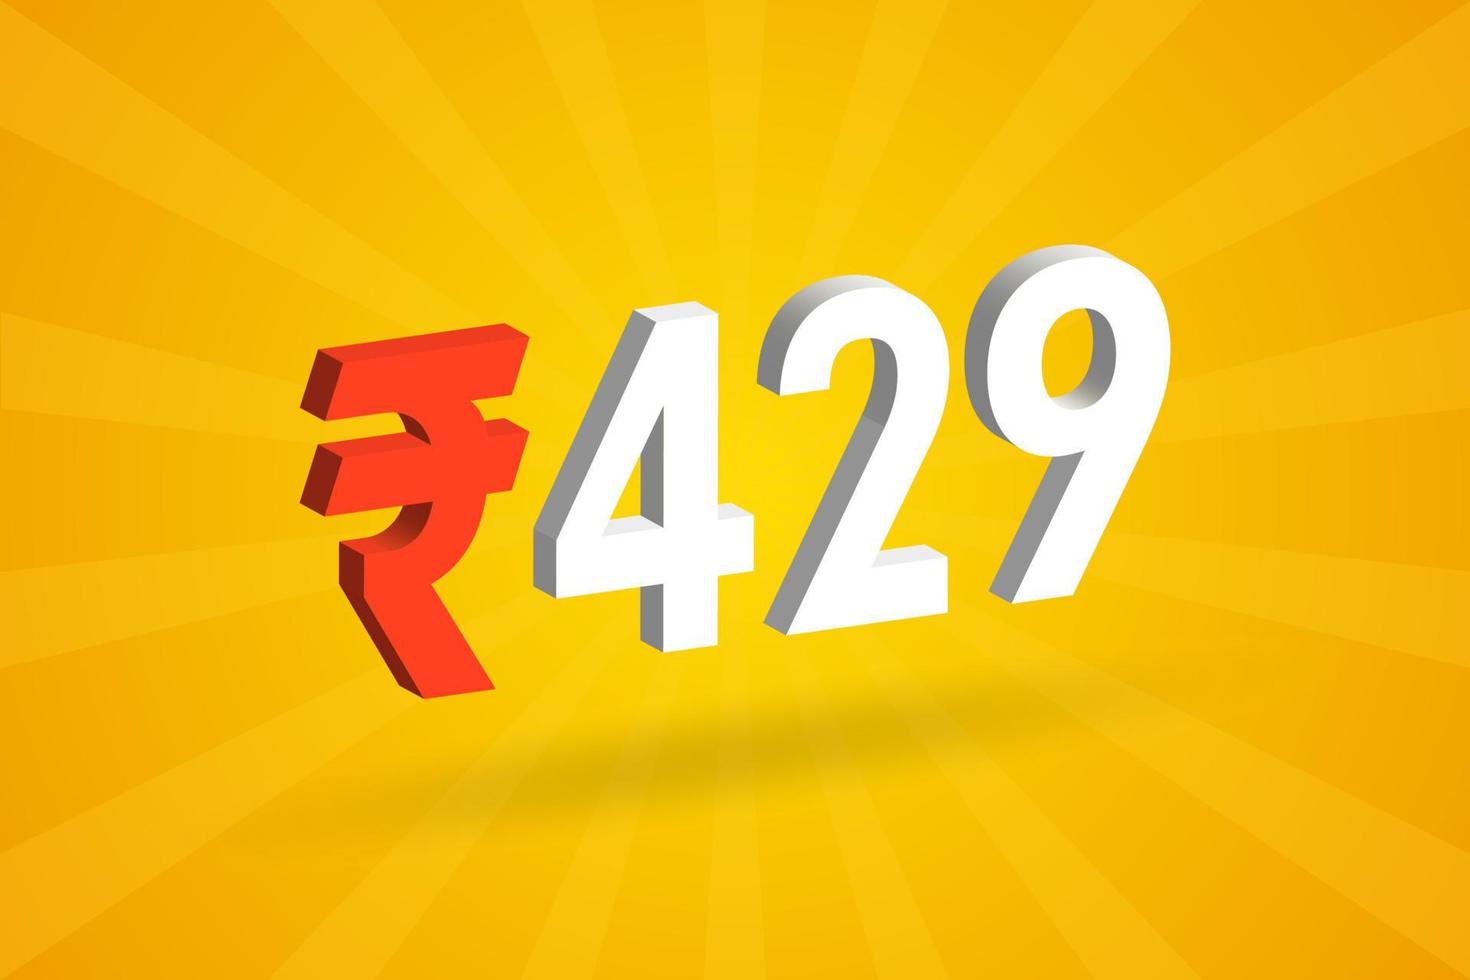 429 Rupee 3D symbol bold text vector image. 3D 429 Indian Rupee currency sign vector illustration